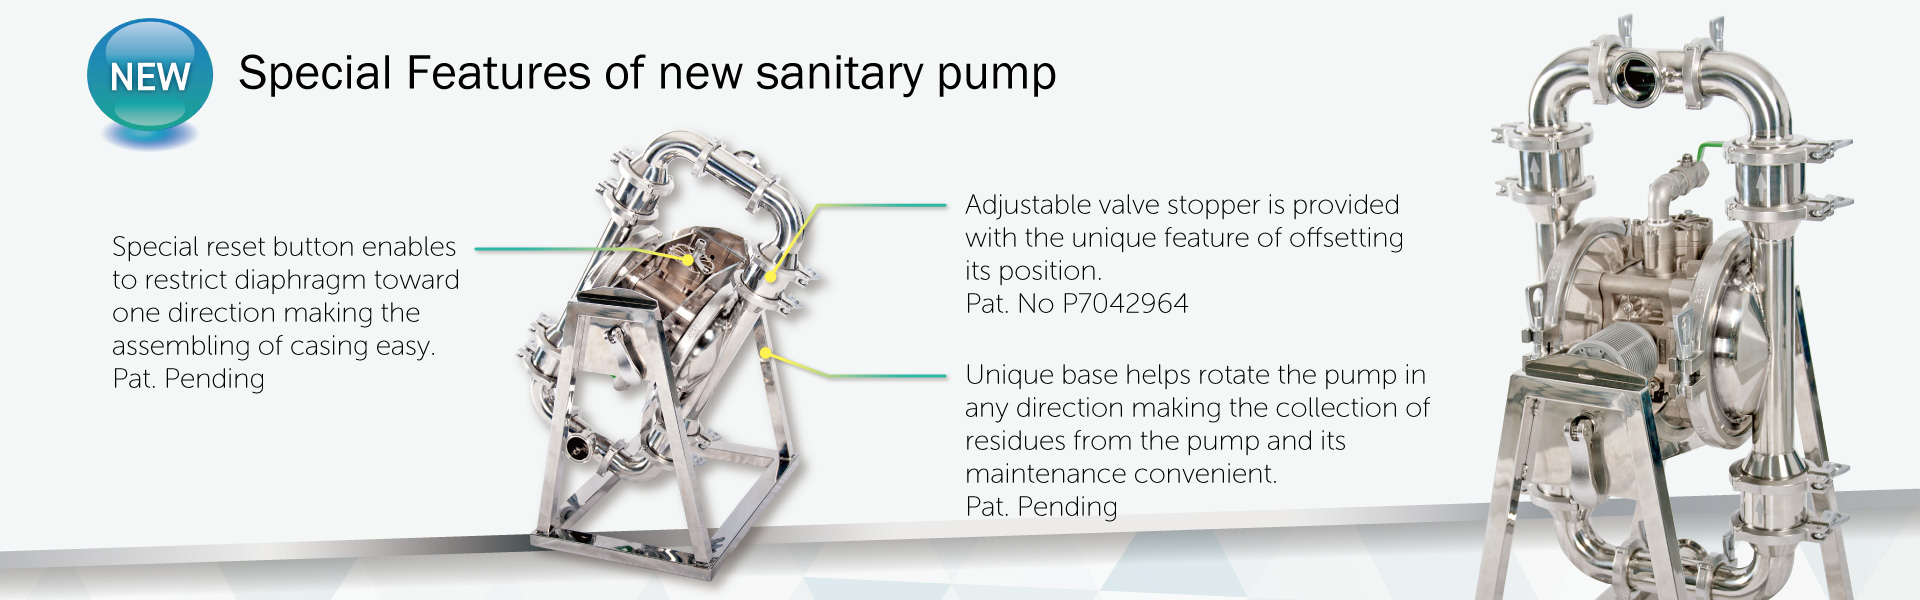 Special Features of new sanitary pump